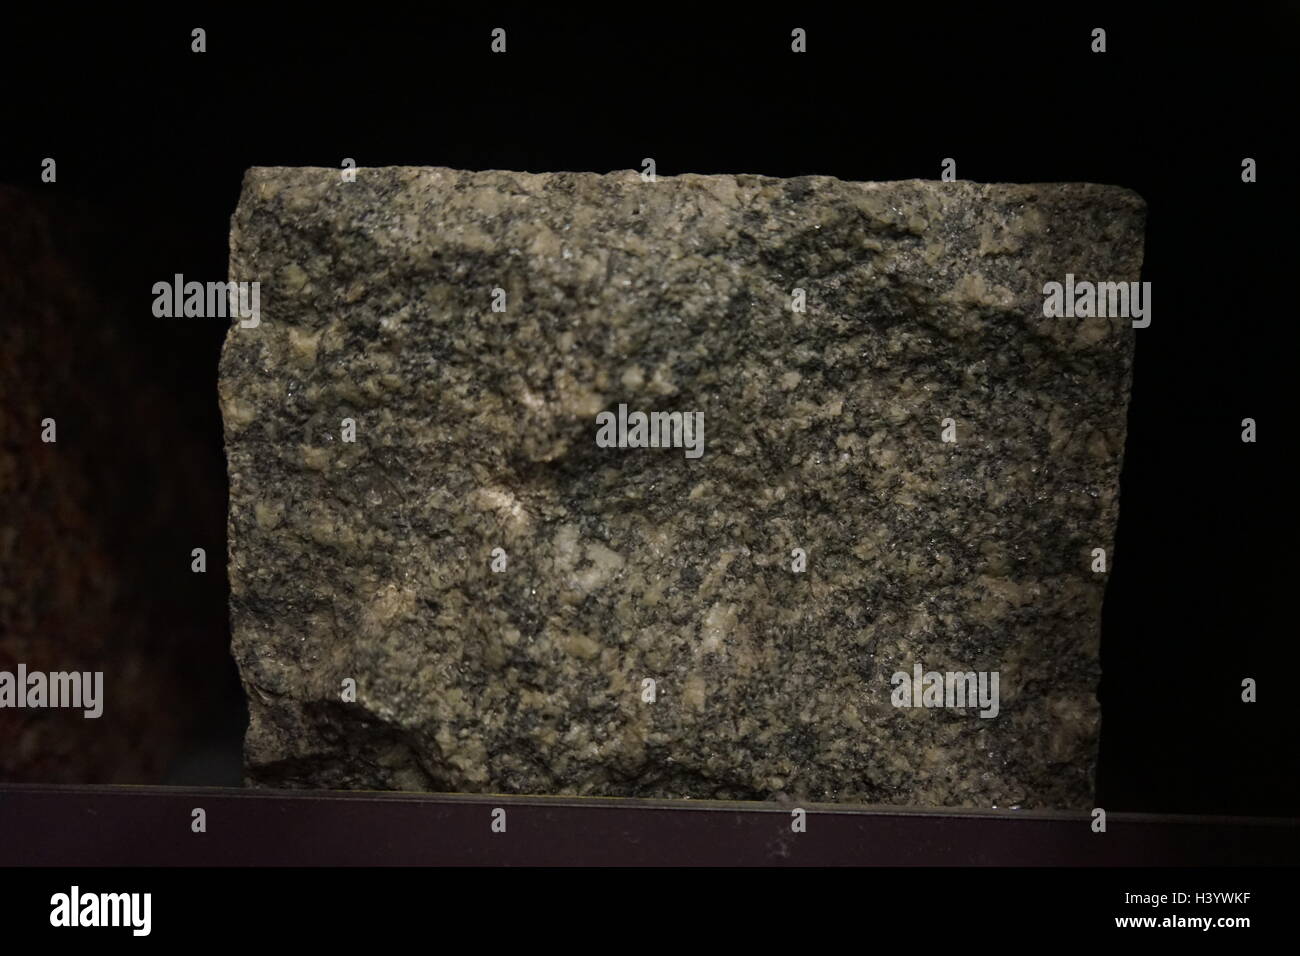 Sample of Granite, a common type of felsic intrusive igneous rock that is granular and phaneritic in texture. Dated 21st Century Stock Photo